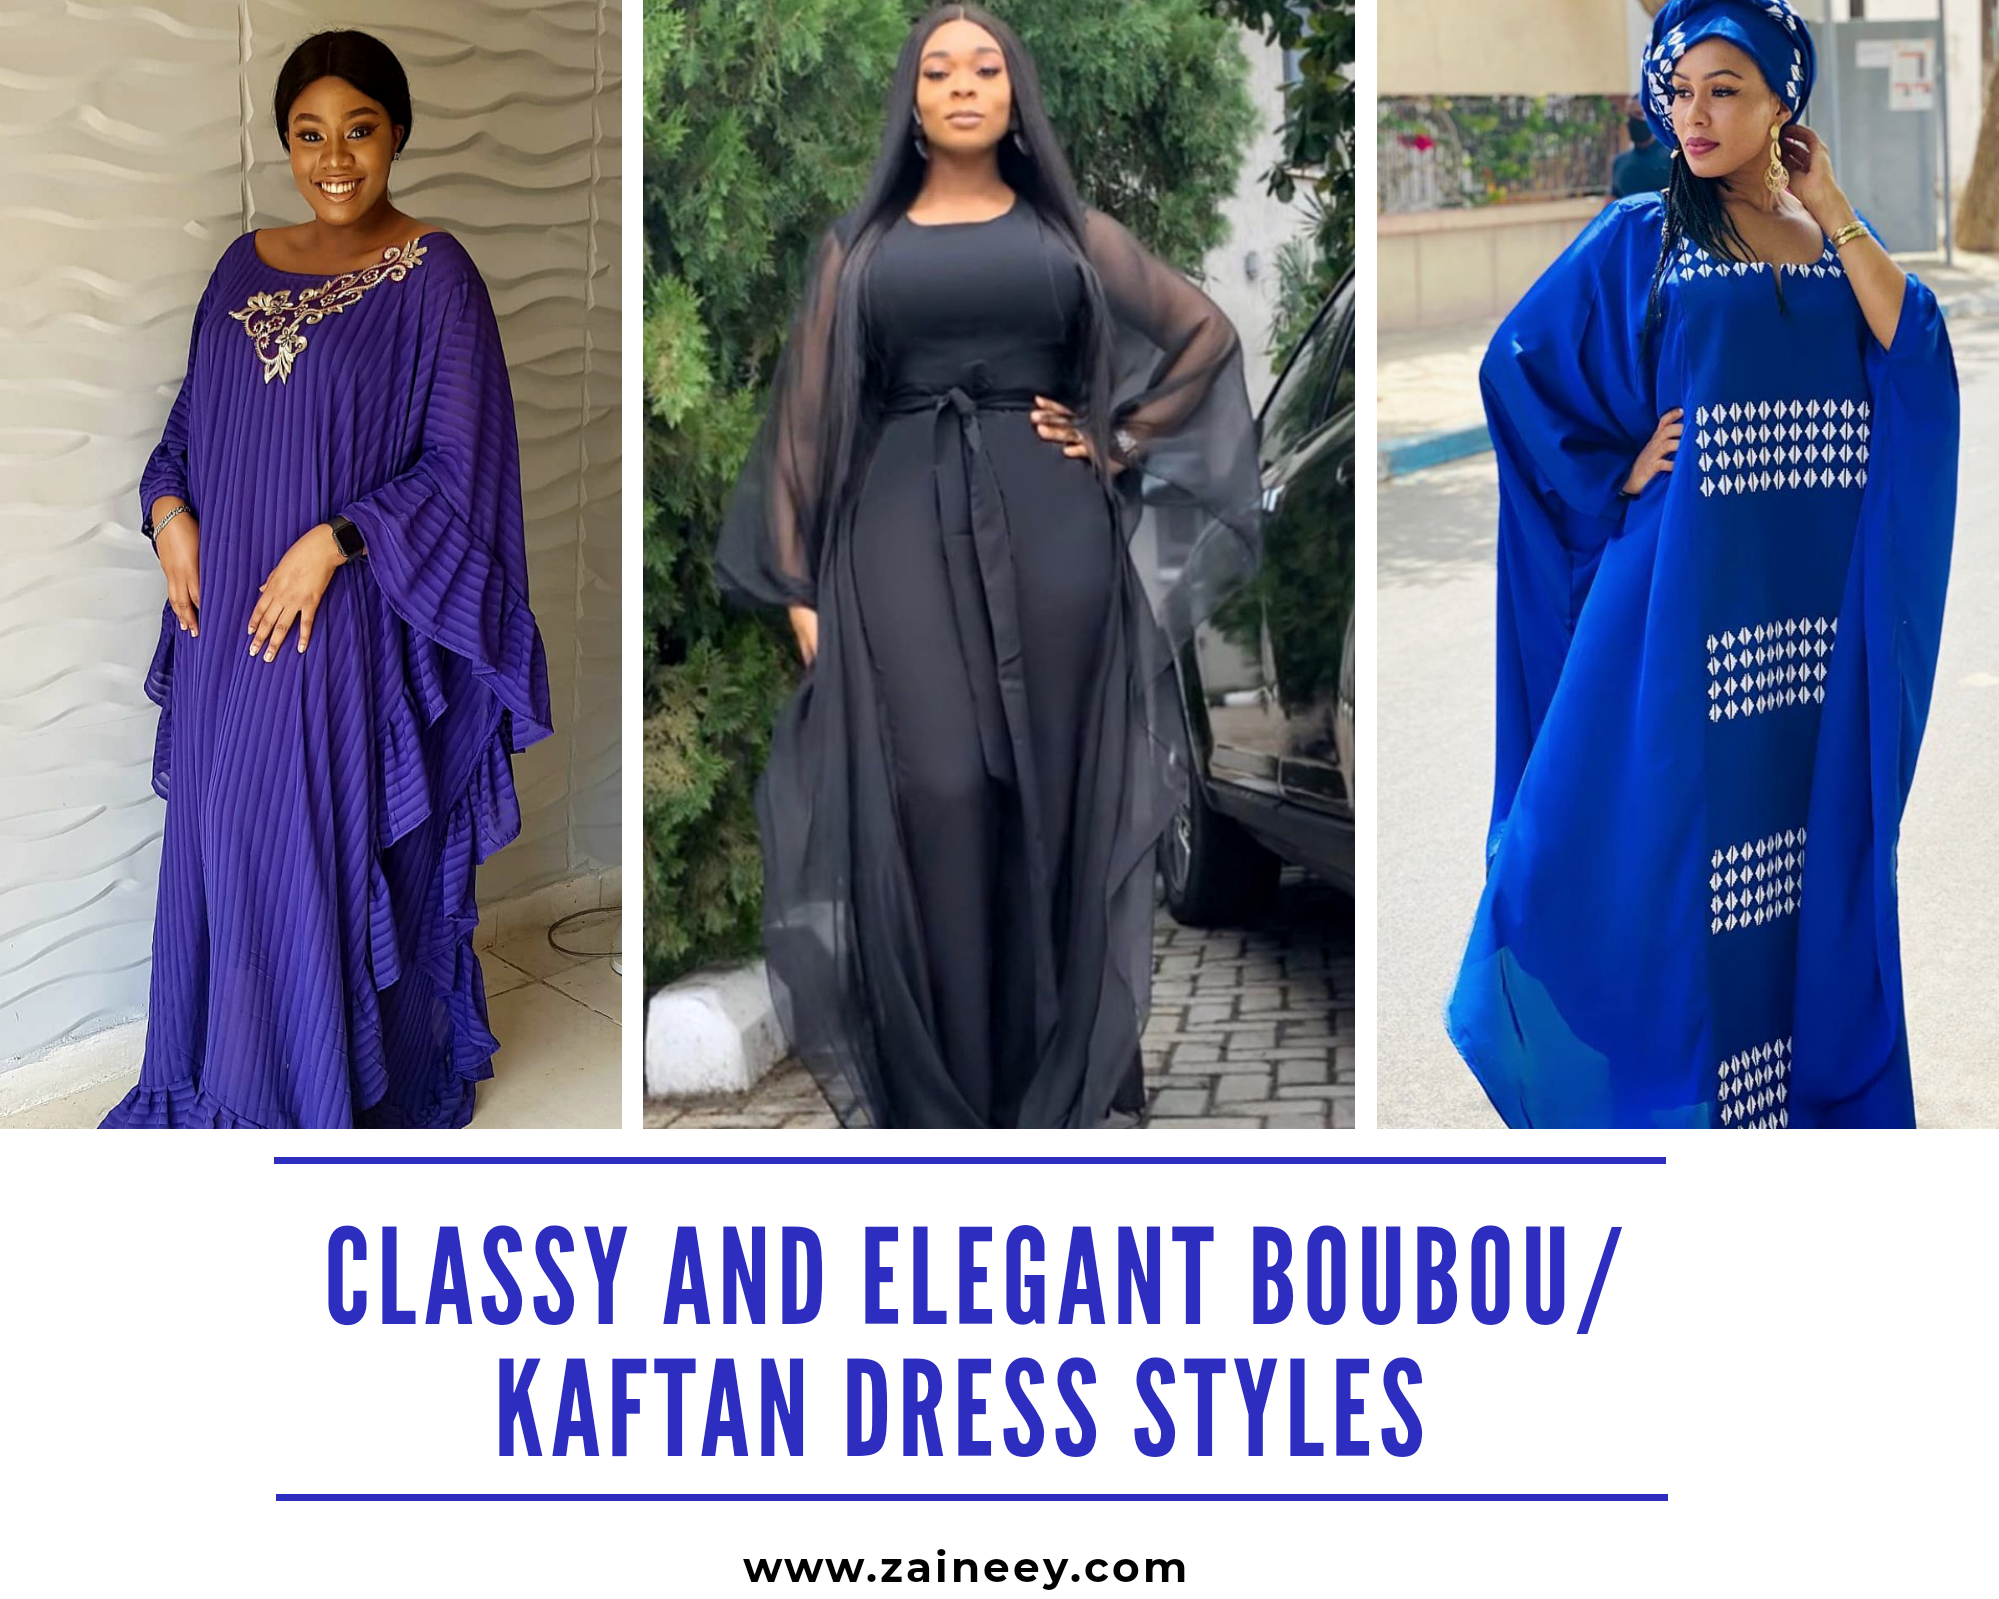 African Dresses and Styles: Classy and Elegant Boubou/Kaftan Dress Styles for Beautiful Ladies